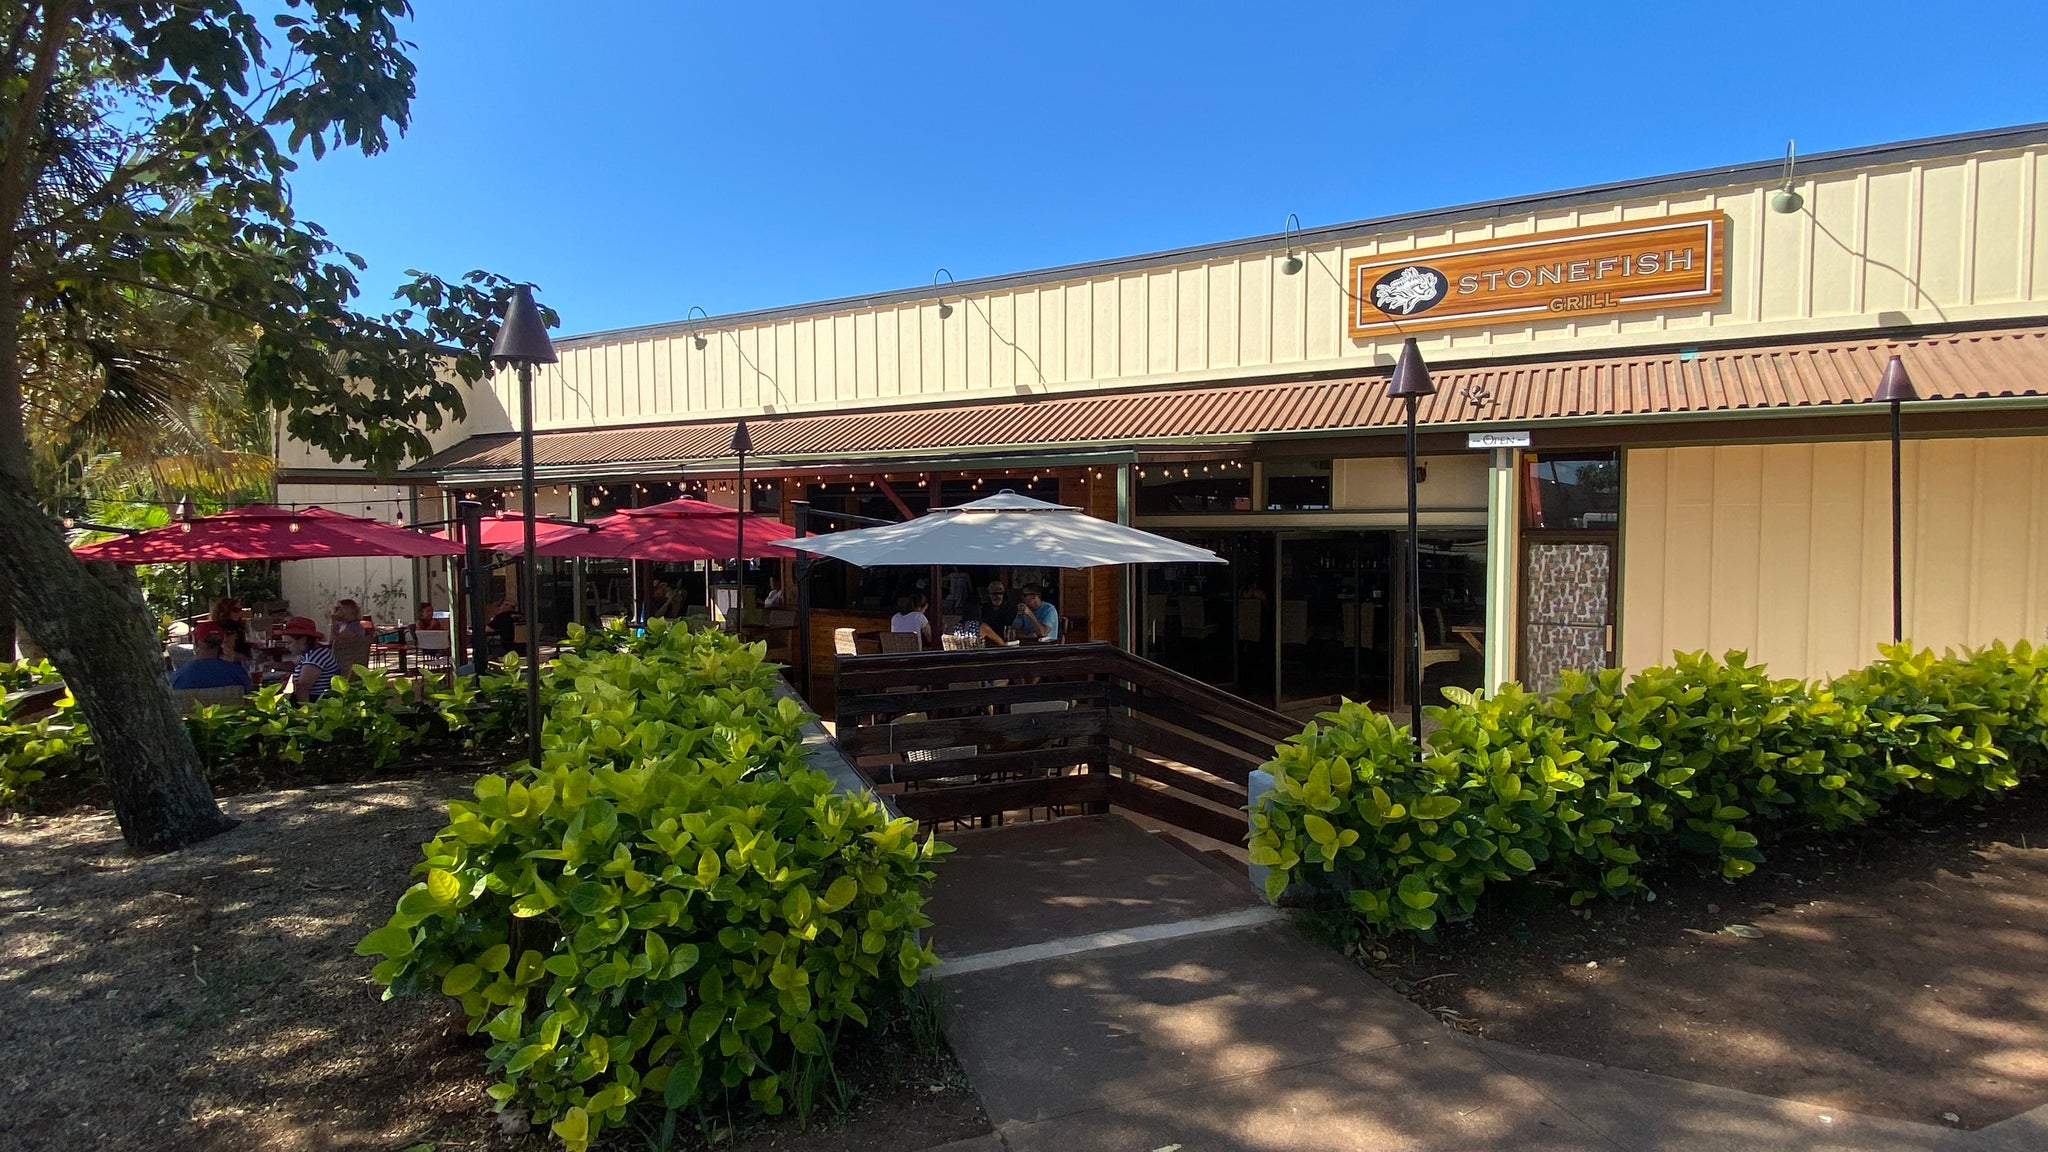 Welcoming Stonefish Grill - A New Restaurant at Haleiwa Town Center